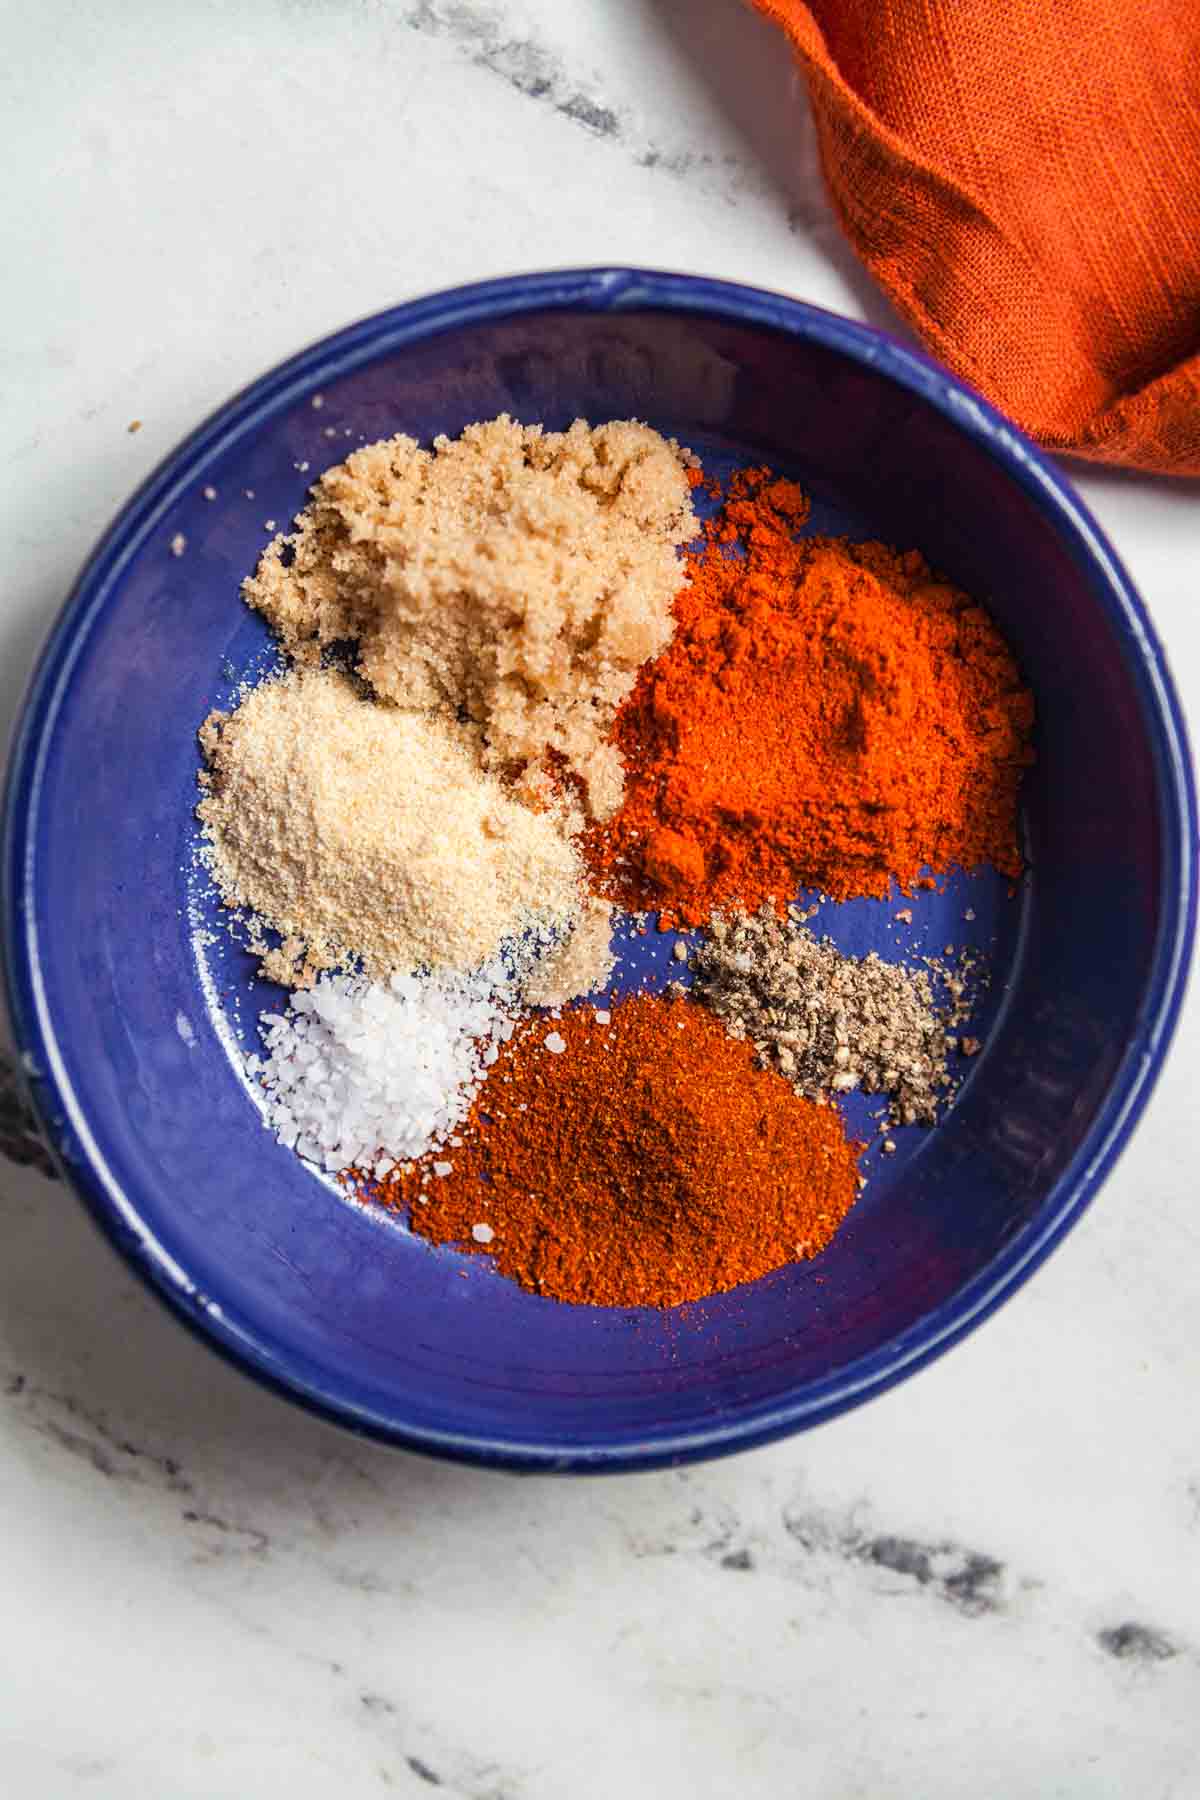 Mixing up your own homemade Nashville hot chicken sauce is easy with spices, brown sugar, and oil. 